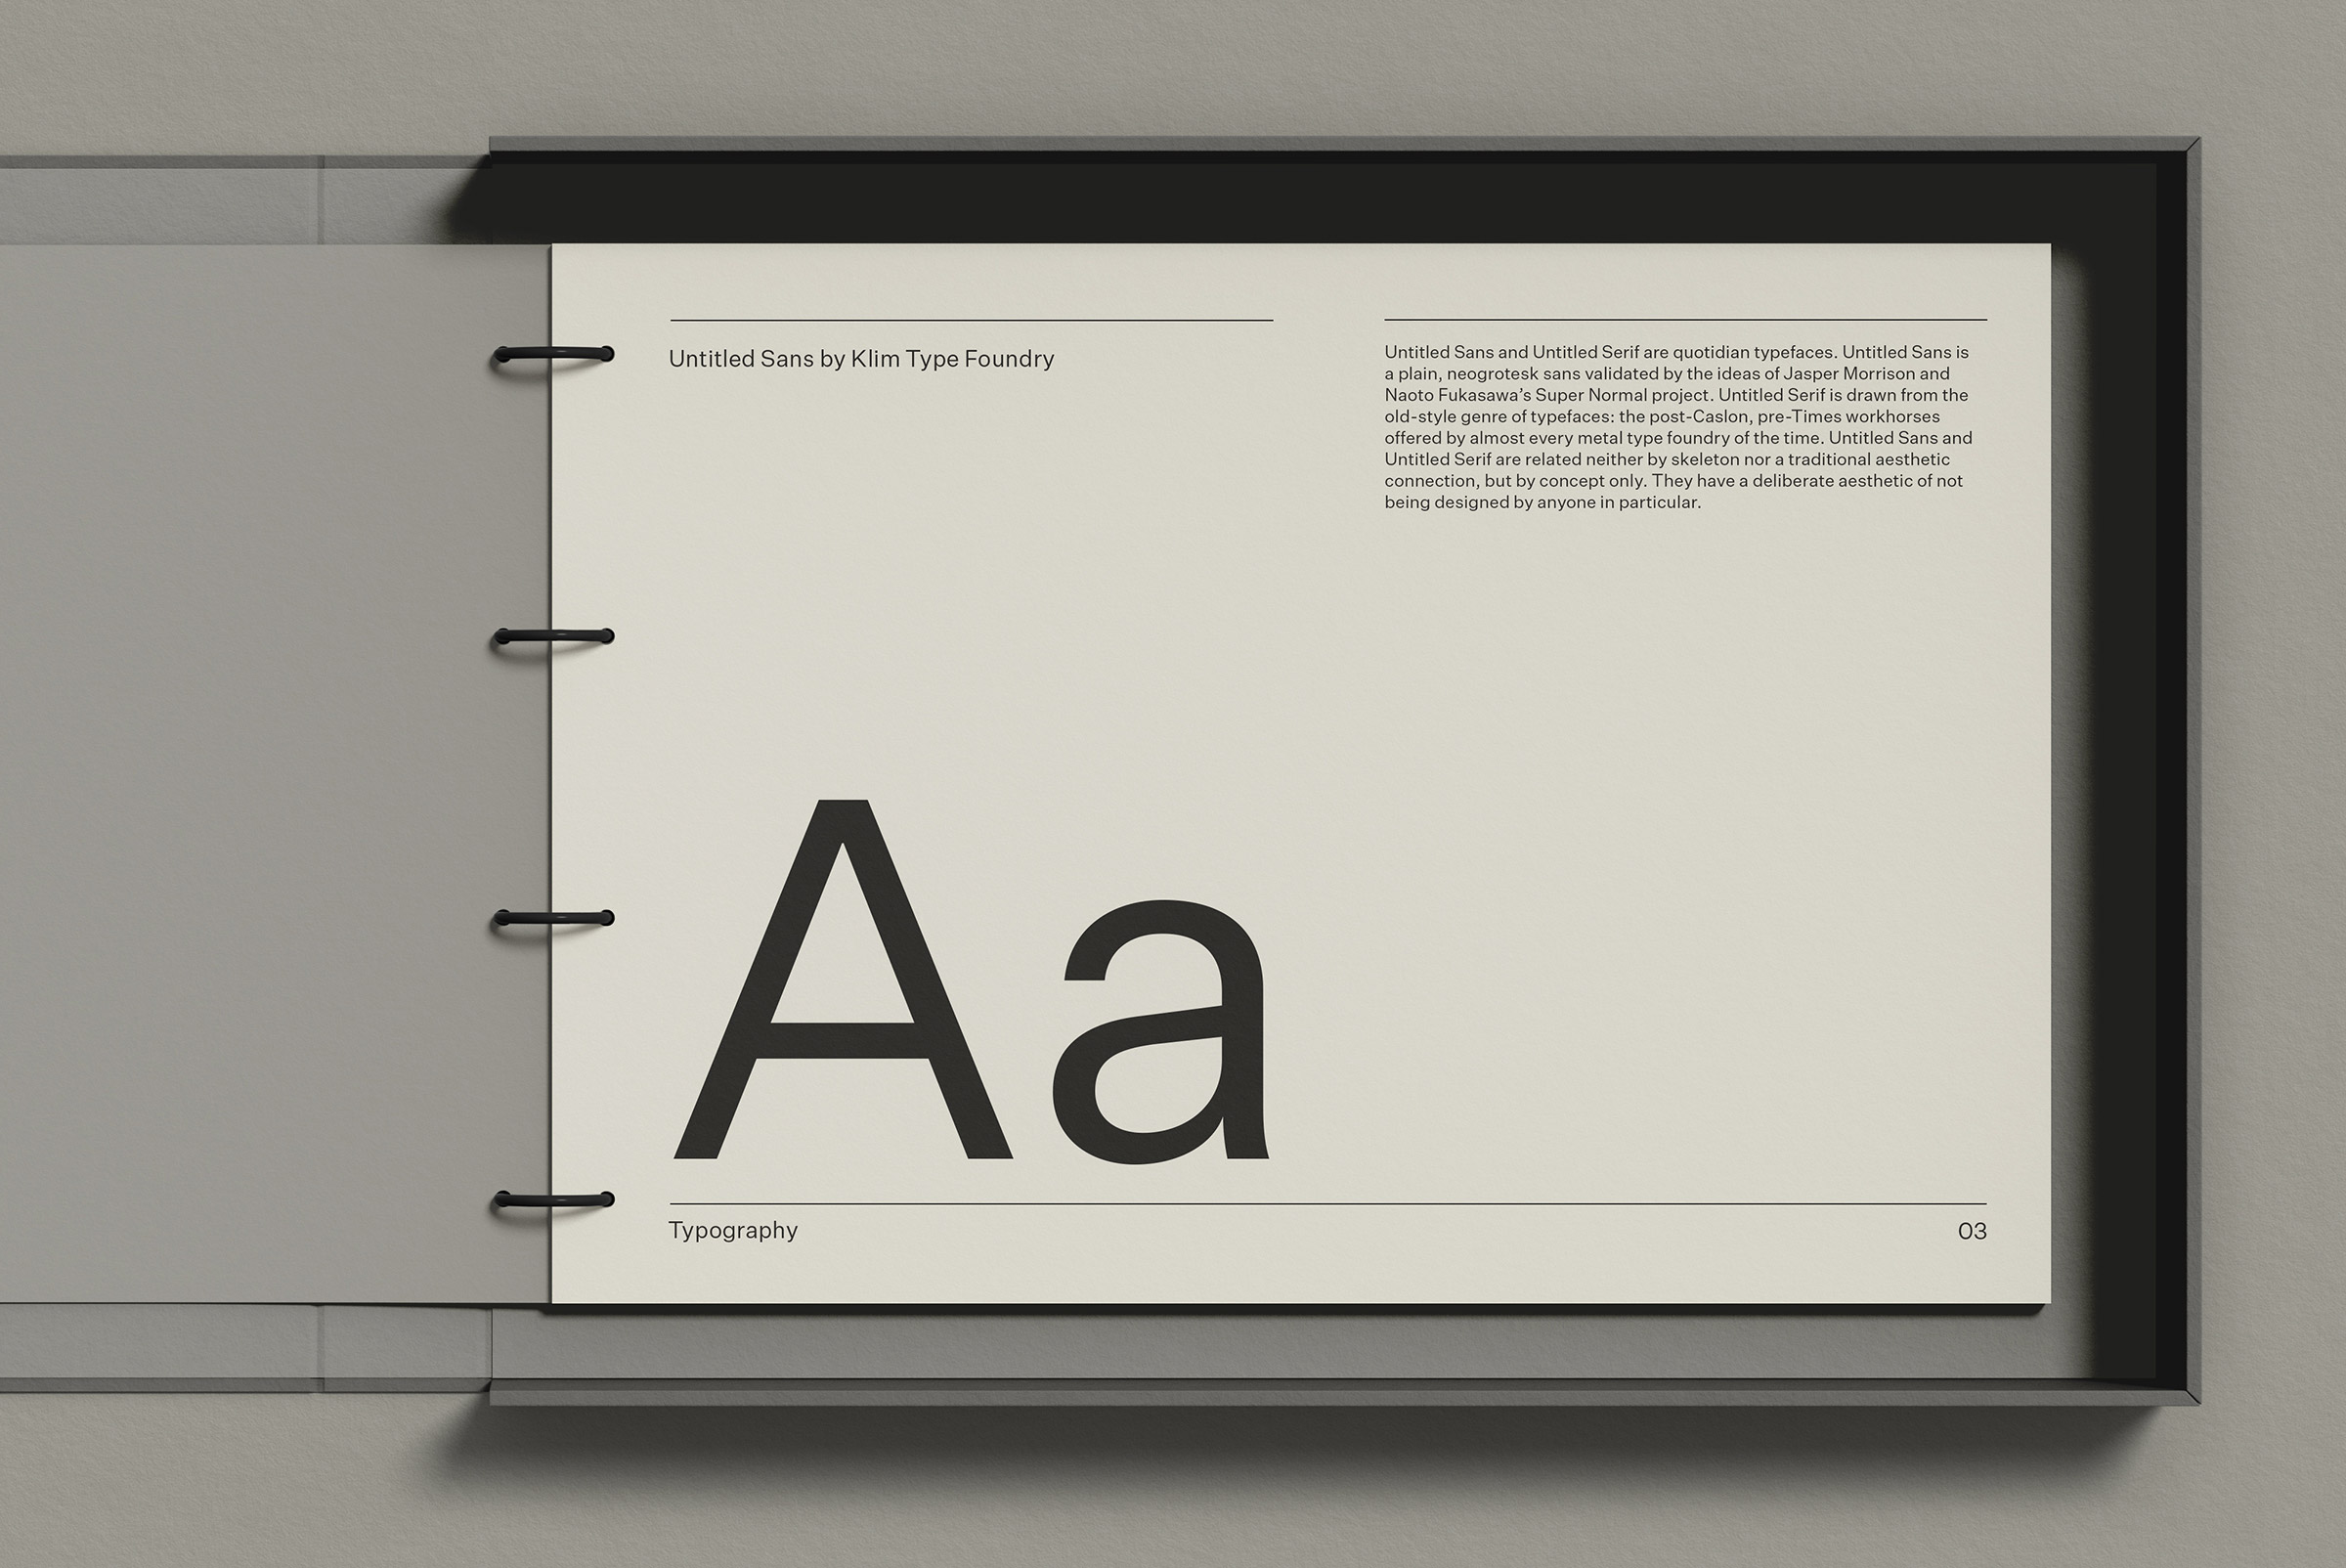 Elegant font presentation in a flipbook, showcasing large and small letters Aa with descriptive text, ideal for design mockups and typography.